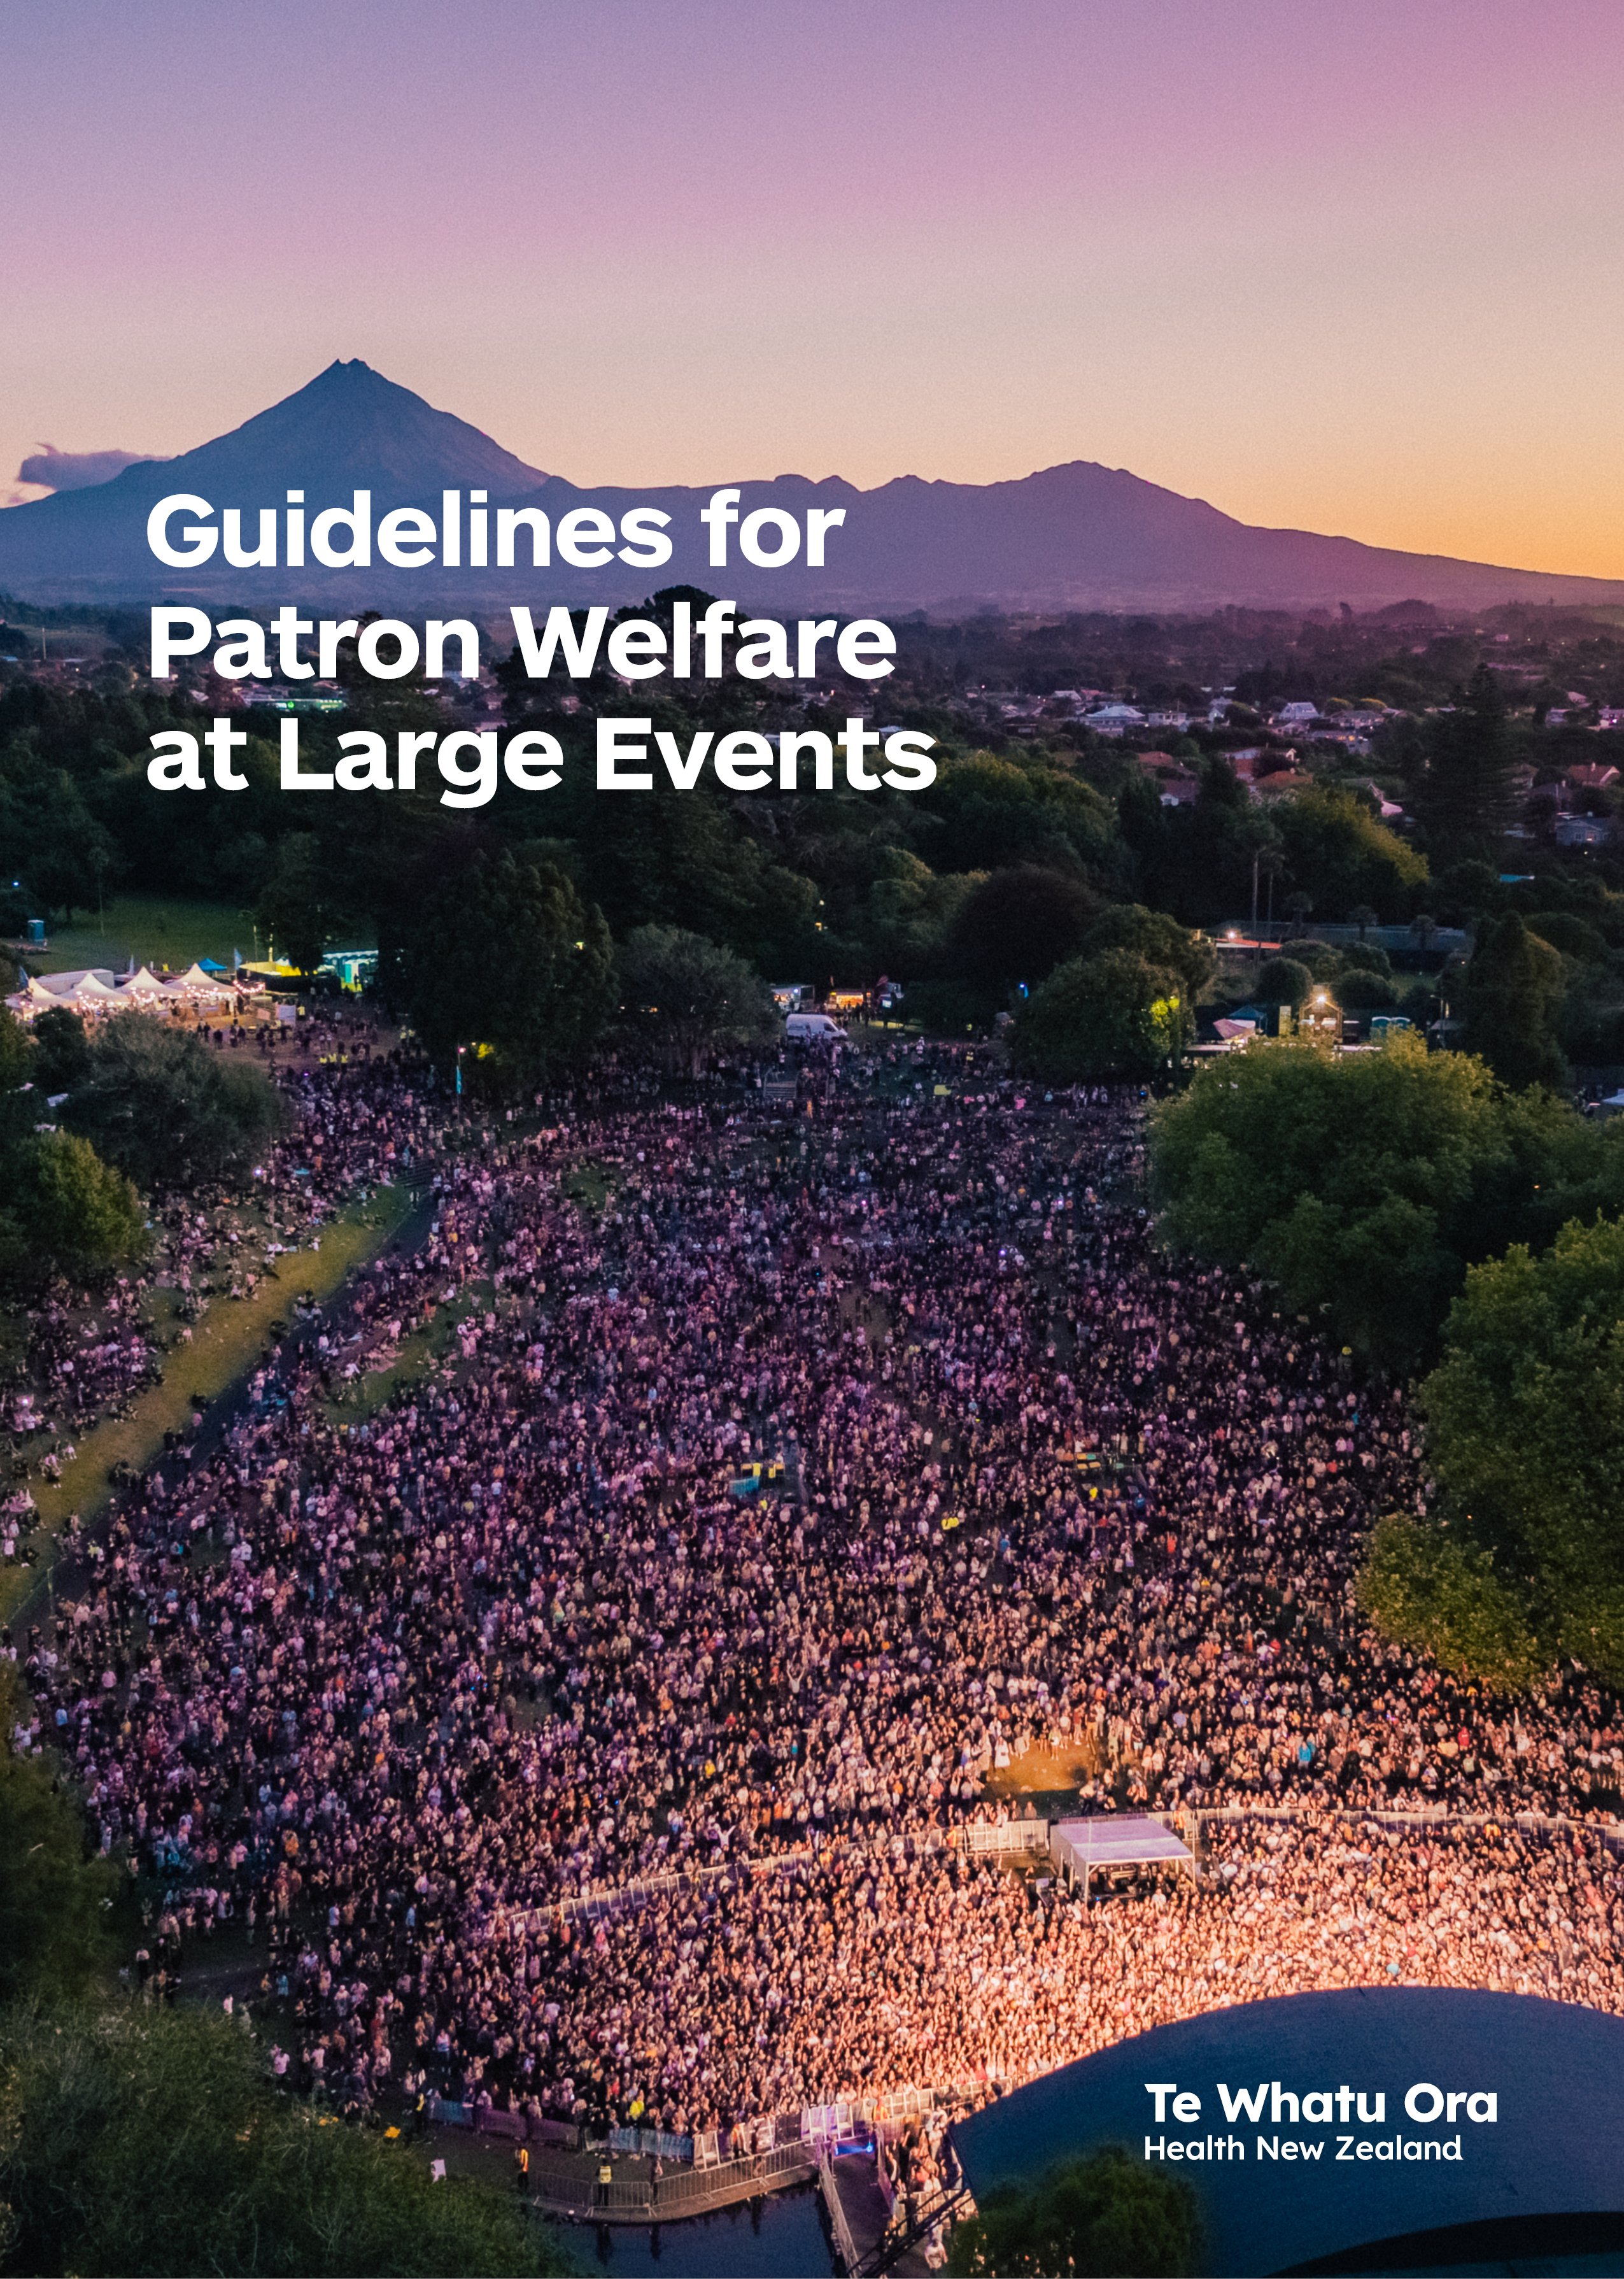 3.2 AL913 Guidelines for Patron Welfare at Large Events Oct 2022